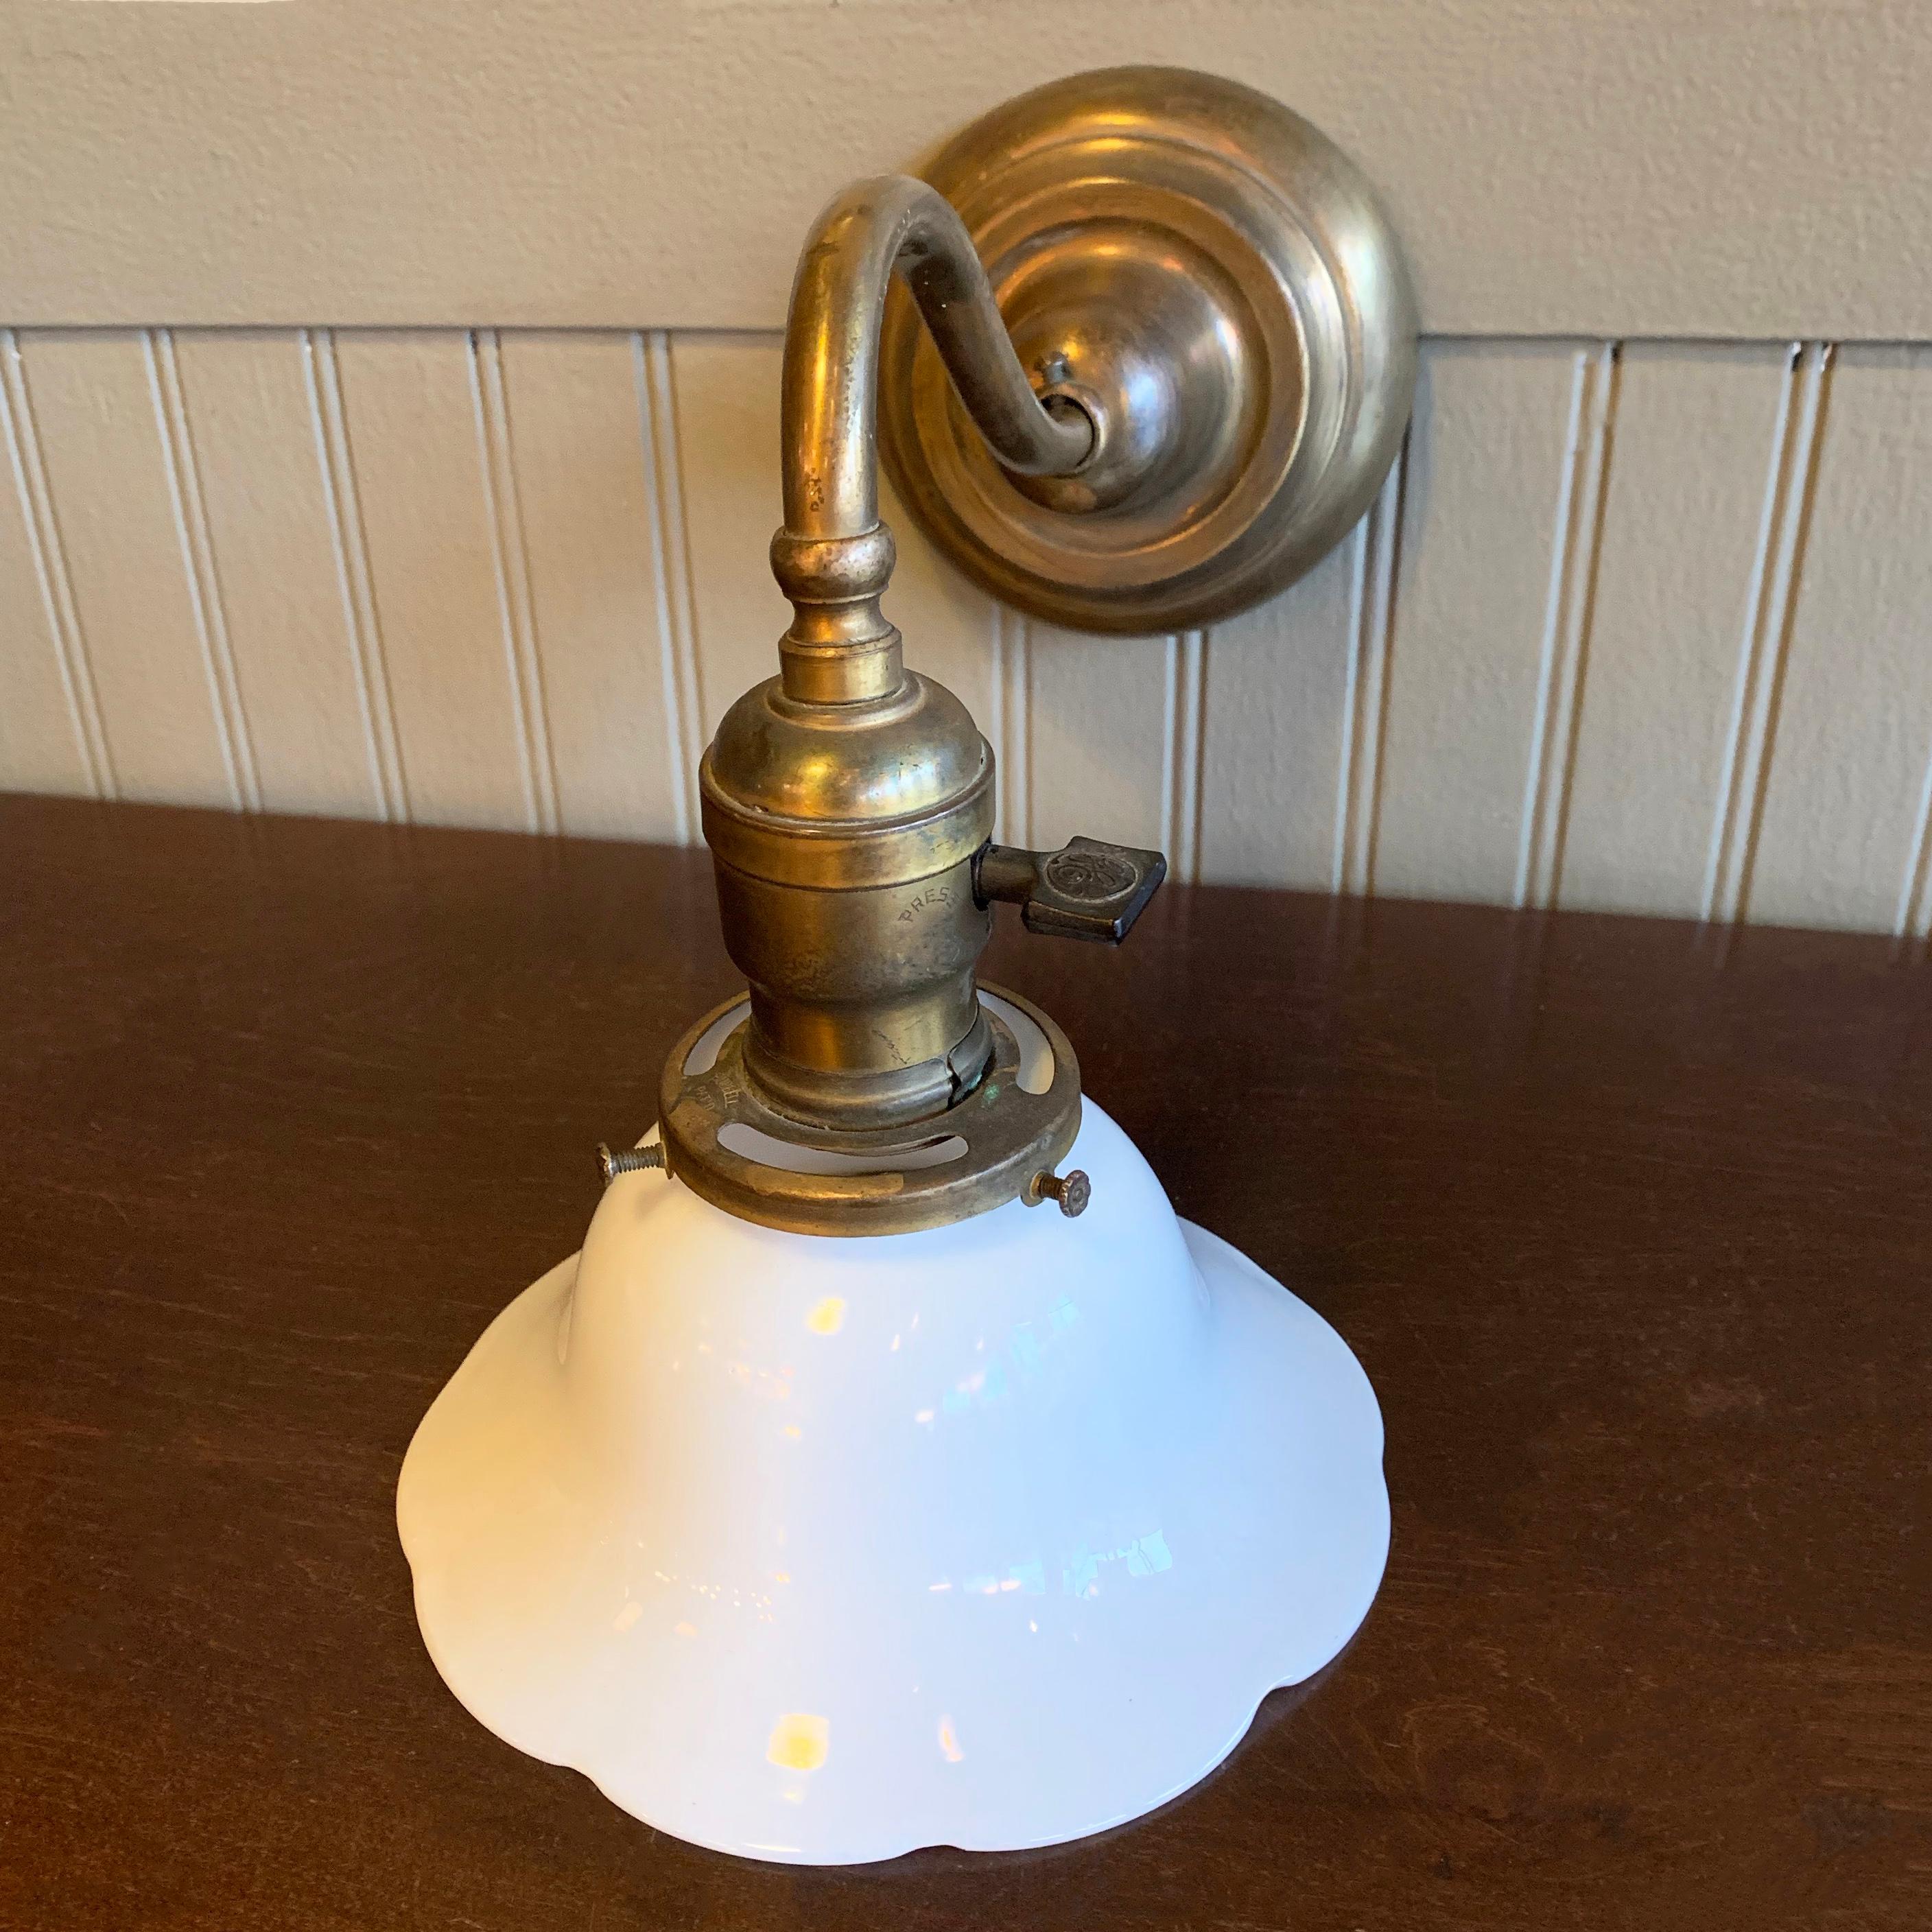 Early 20th century wall sconce lamp features a curved brass stem with ruffled edge, milk glass shade. The sconce is wired to accept up to a 100 watt bulb. The backplate measures 4.5 inches diameter.